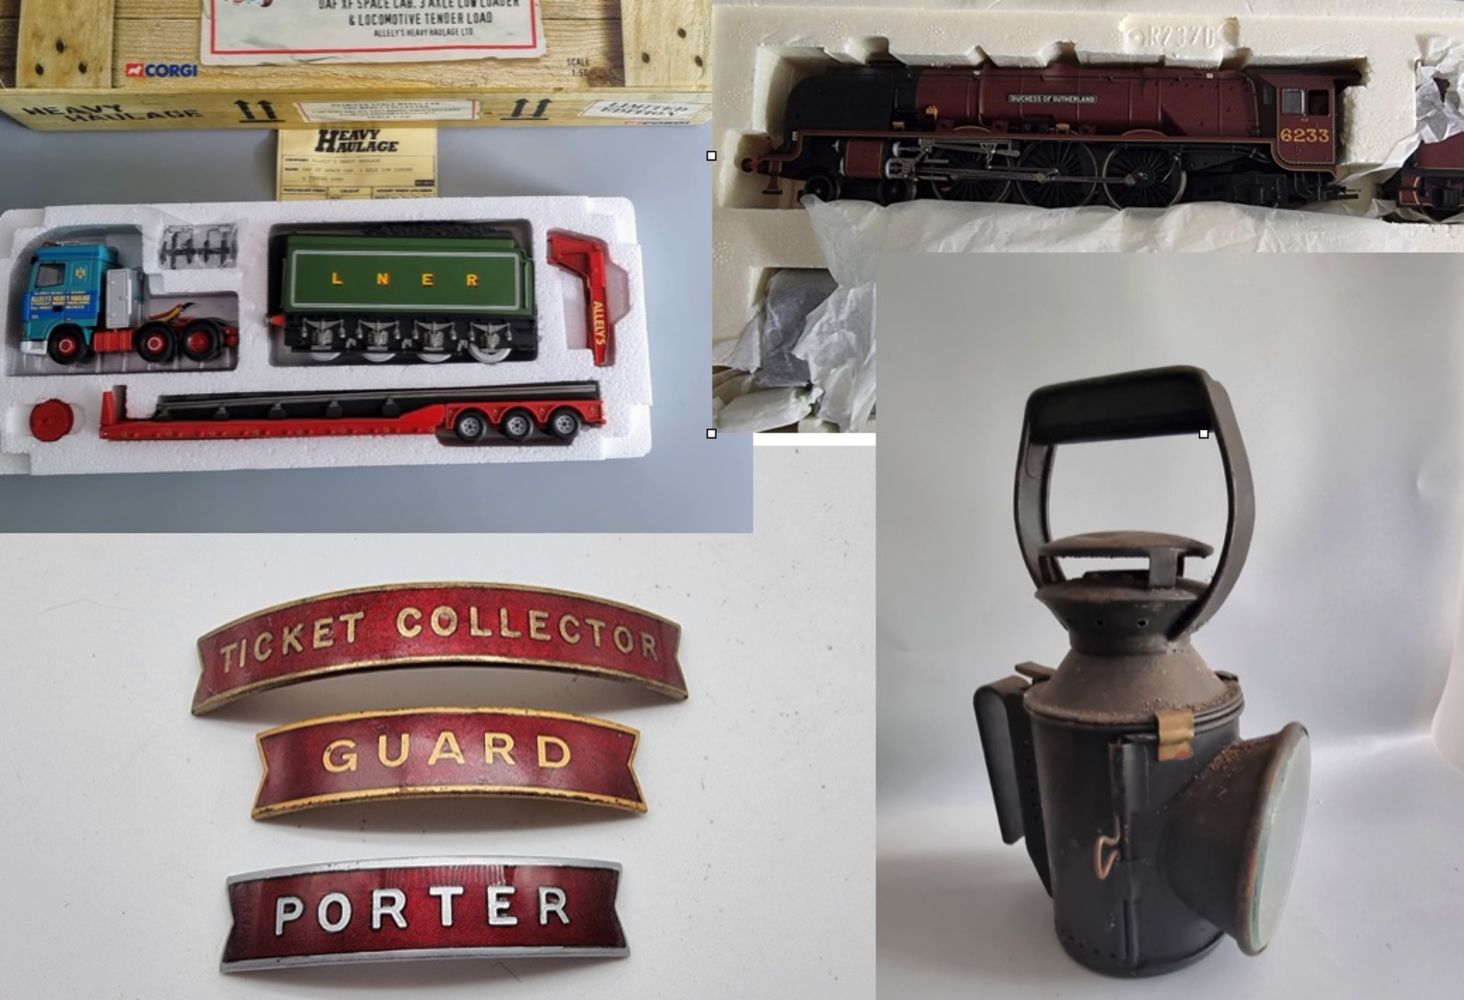 Model Railway Trains & Railwayana - OO Gauge,  Badges, Signs, Plates, Railway Lamps, Totems, - Private Collection